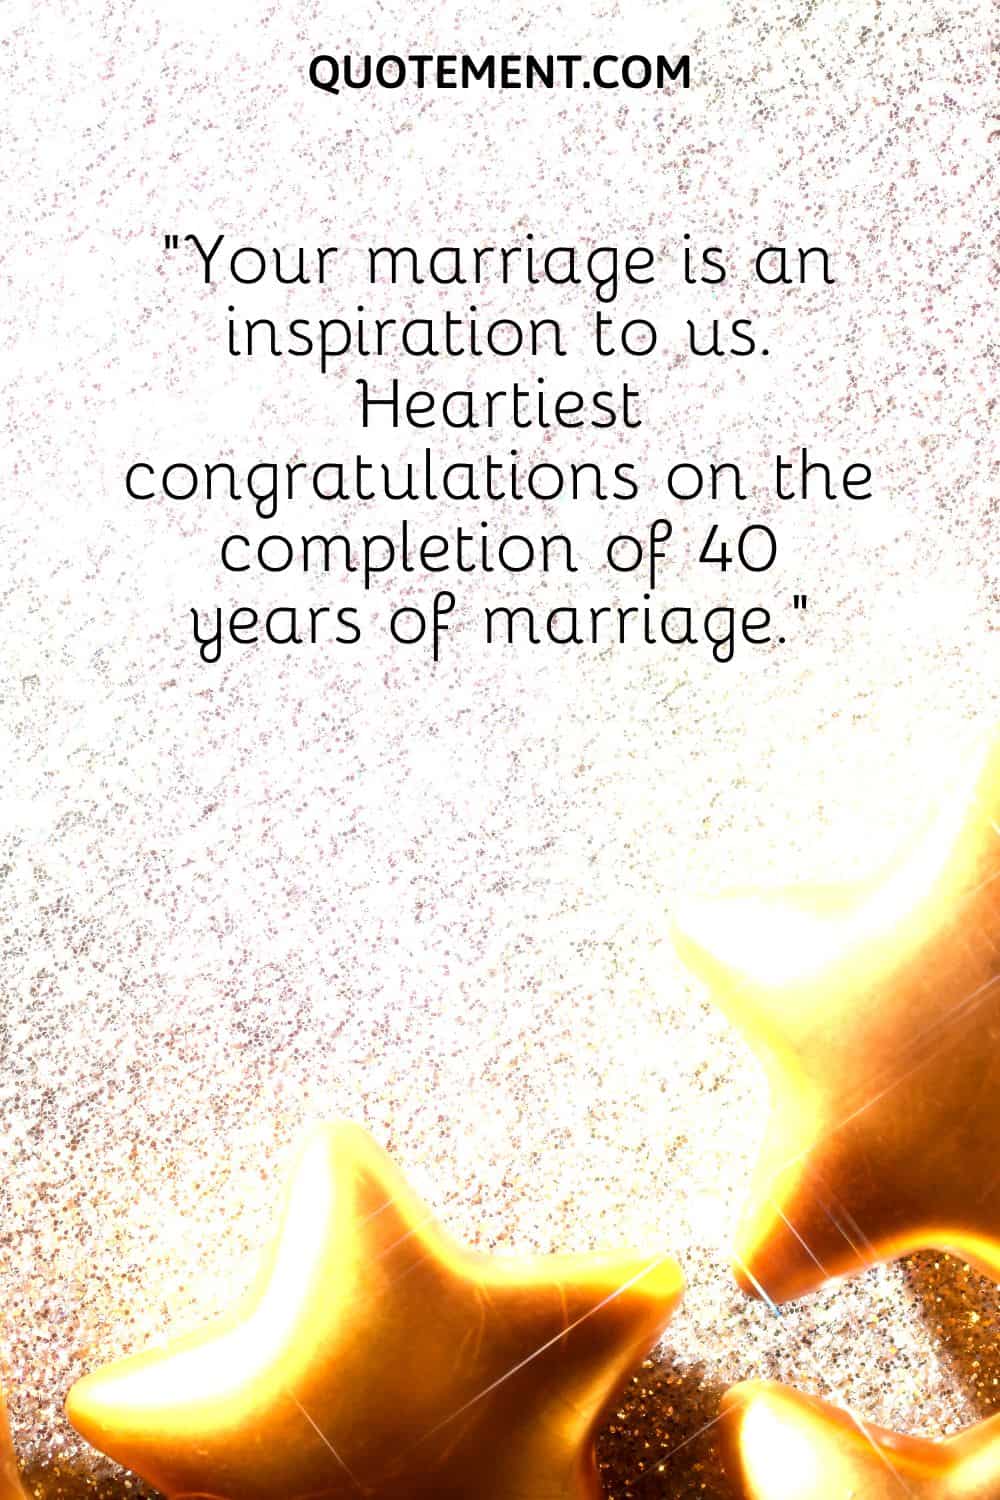 Your marriage is an inspiration to us